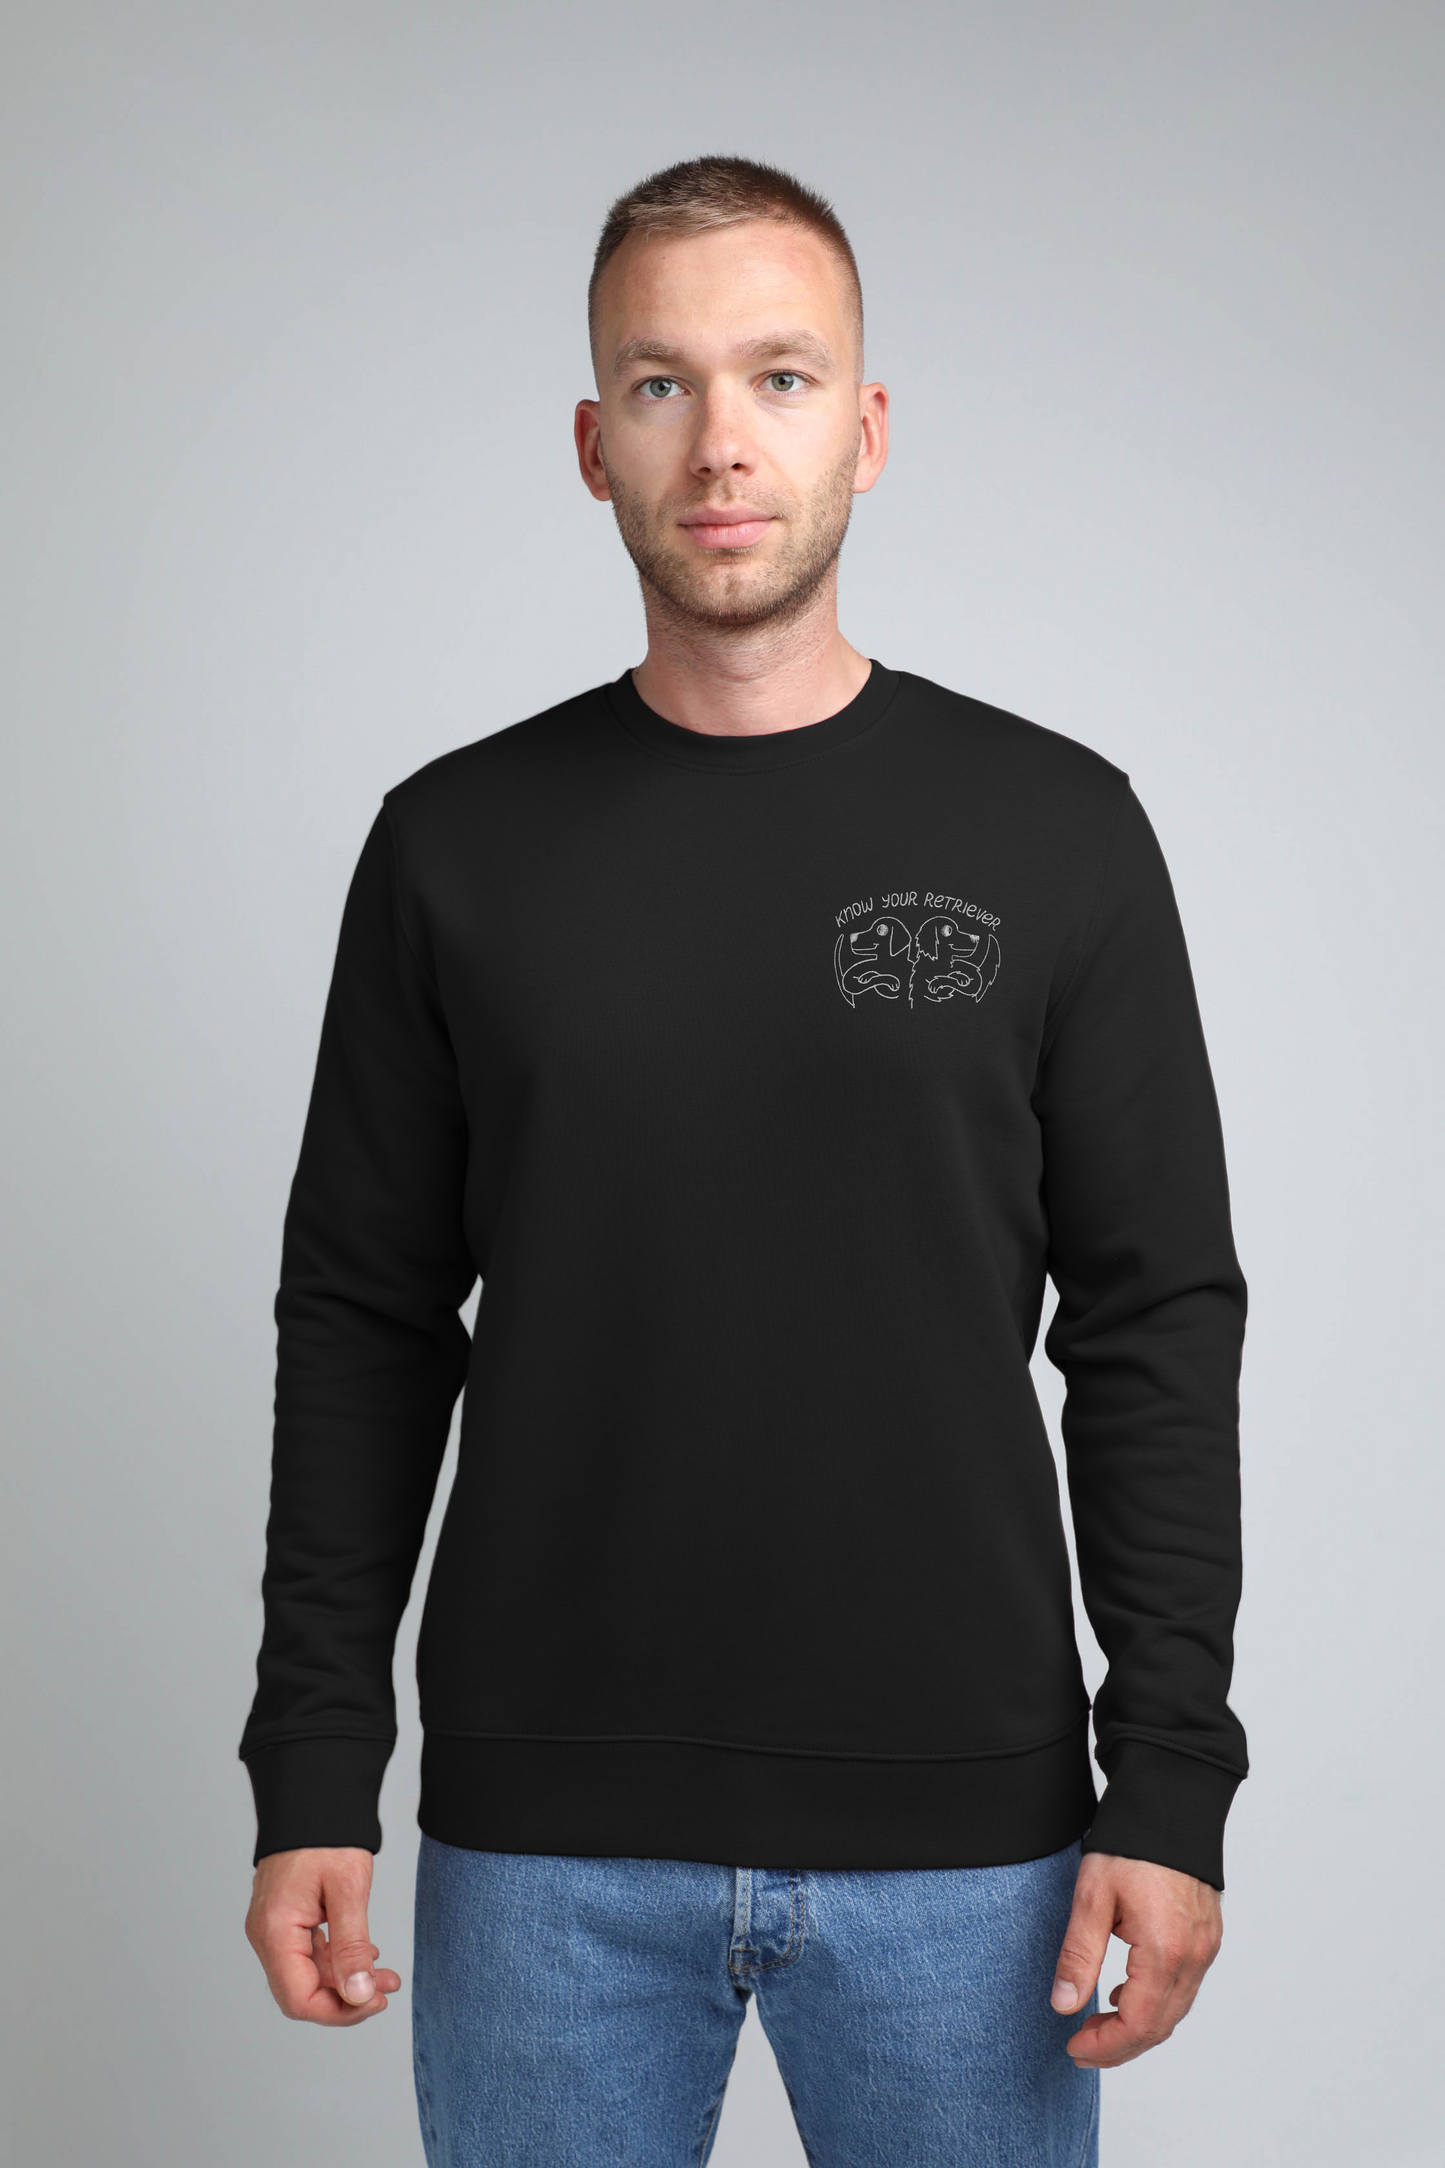 Know your retriever | Crew neck sweatshirt with embroidered dogs. Regular fit | Unisex by My Wild Other